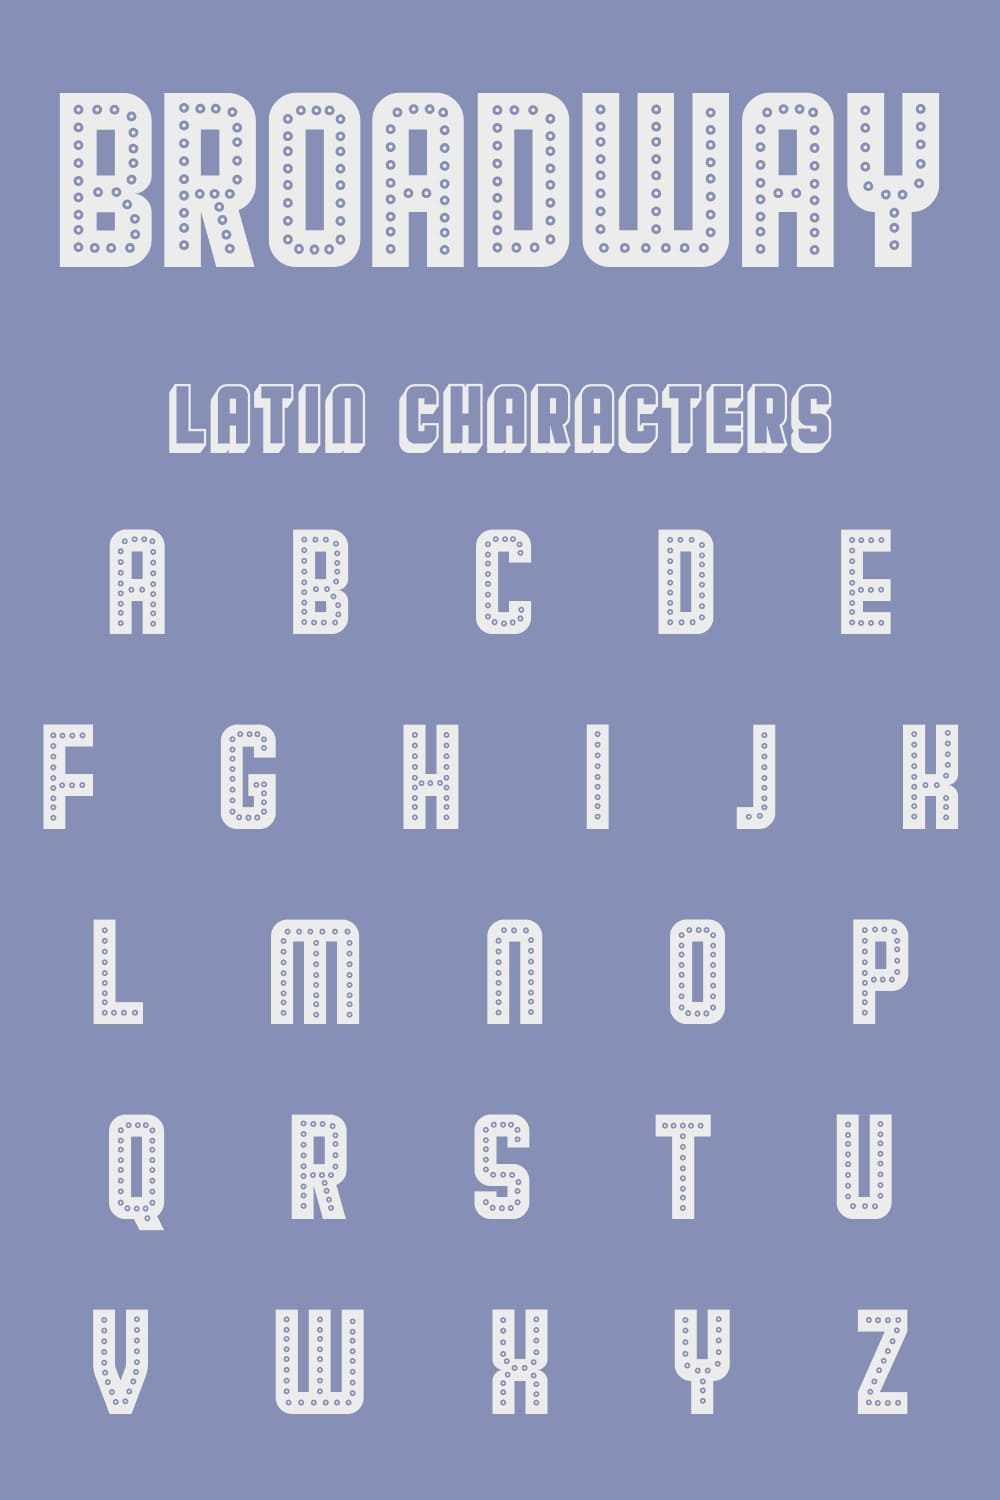 Latin characters of font in dots.